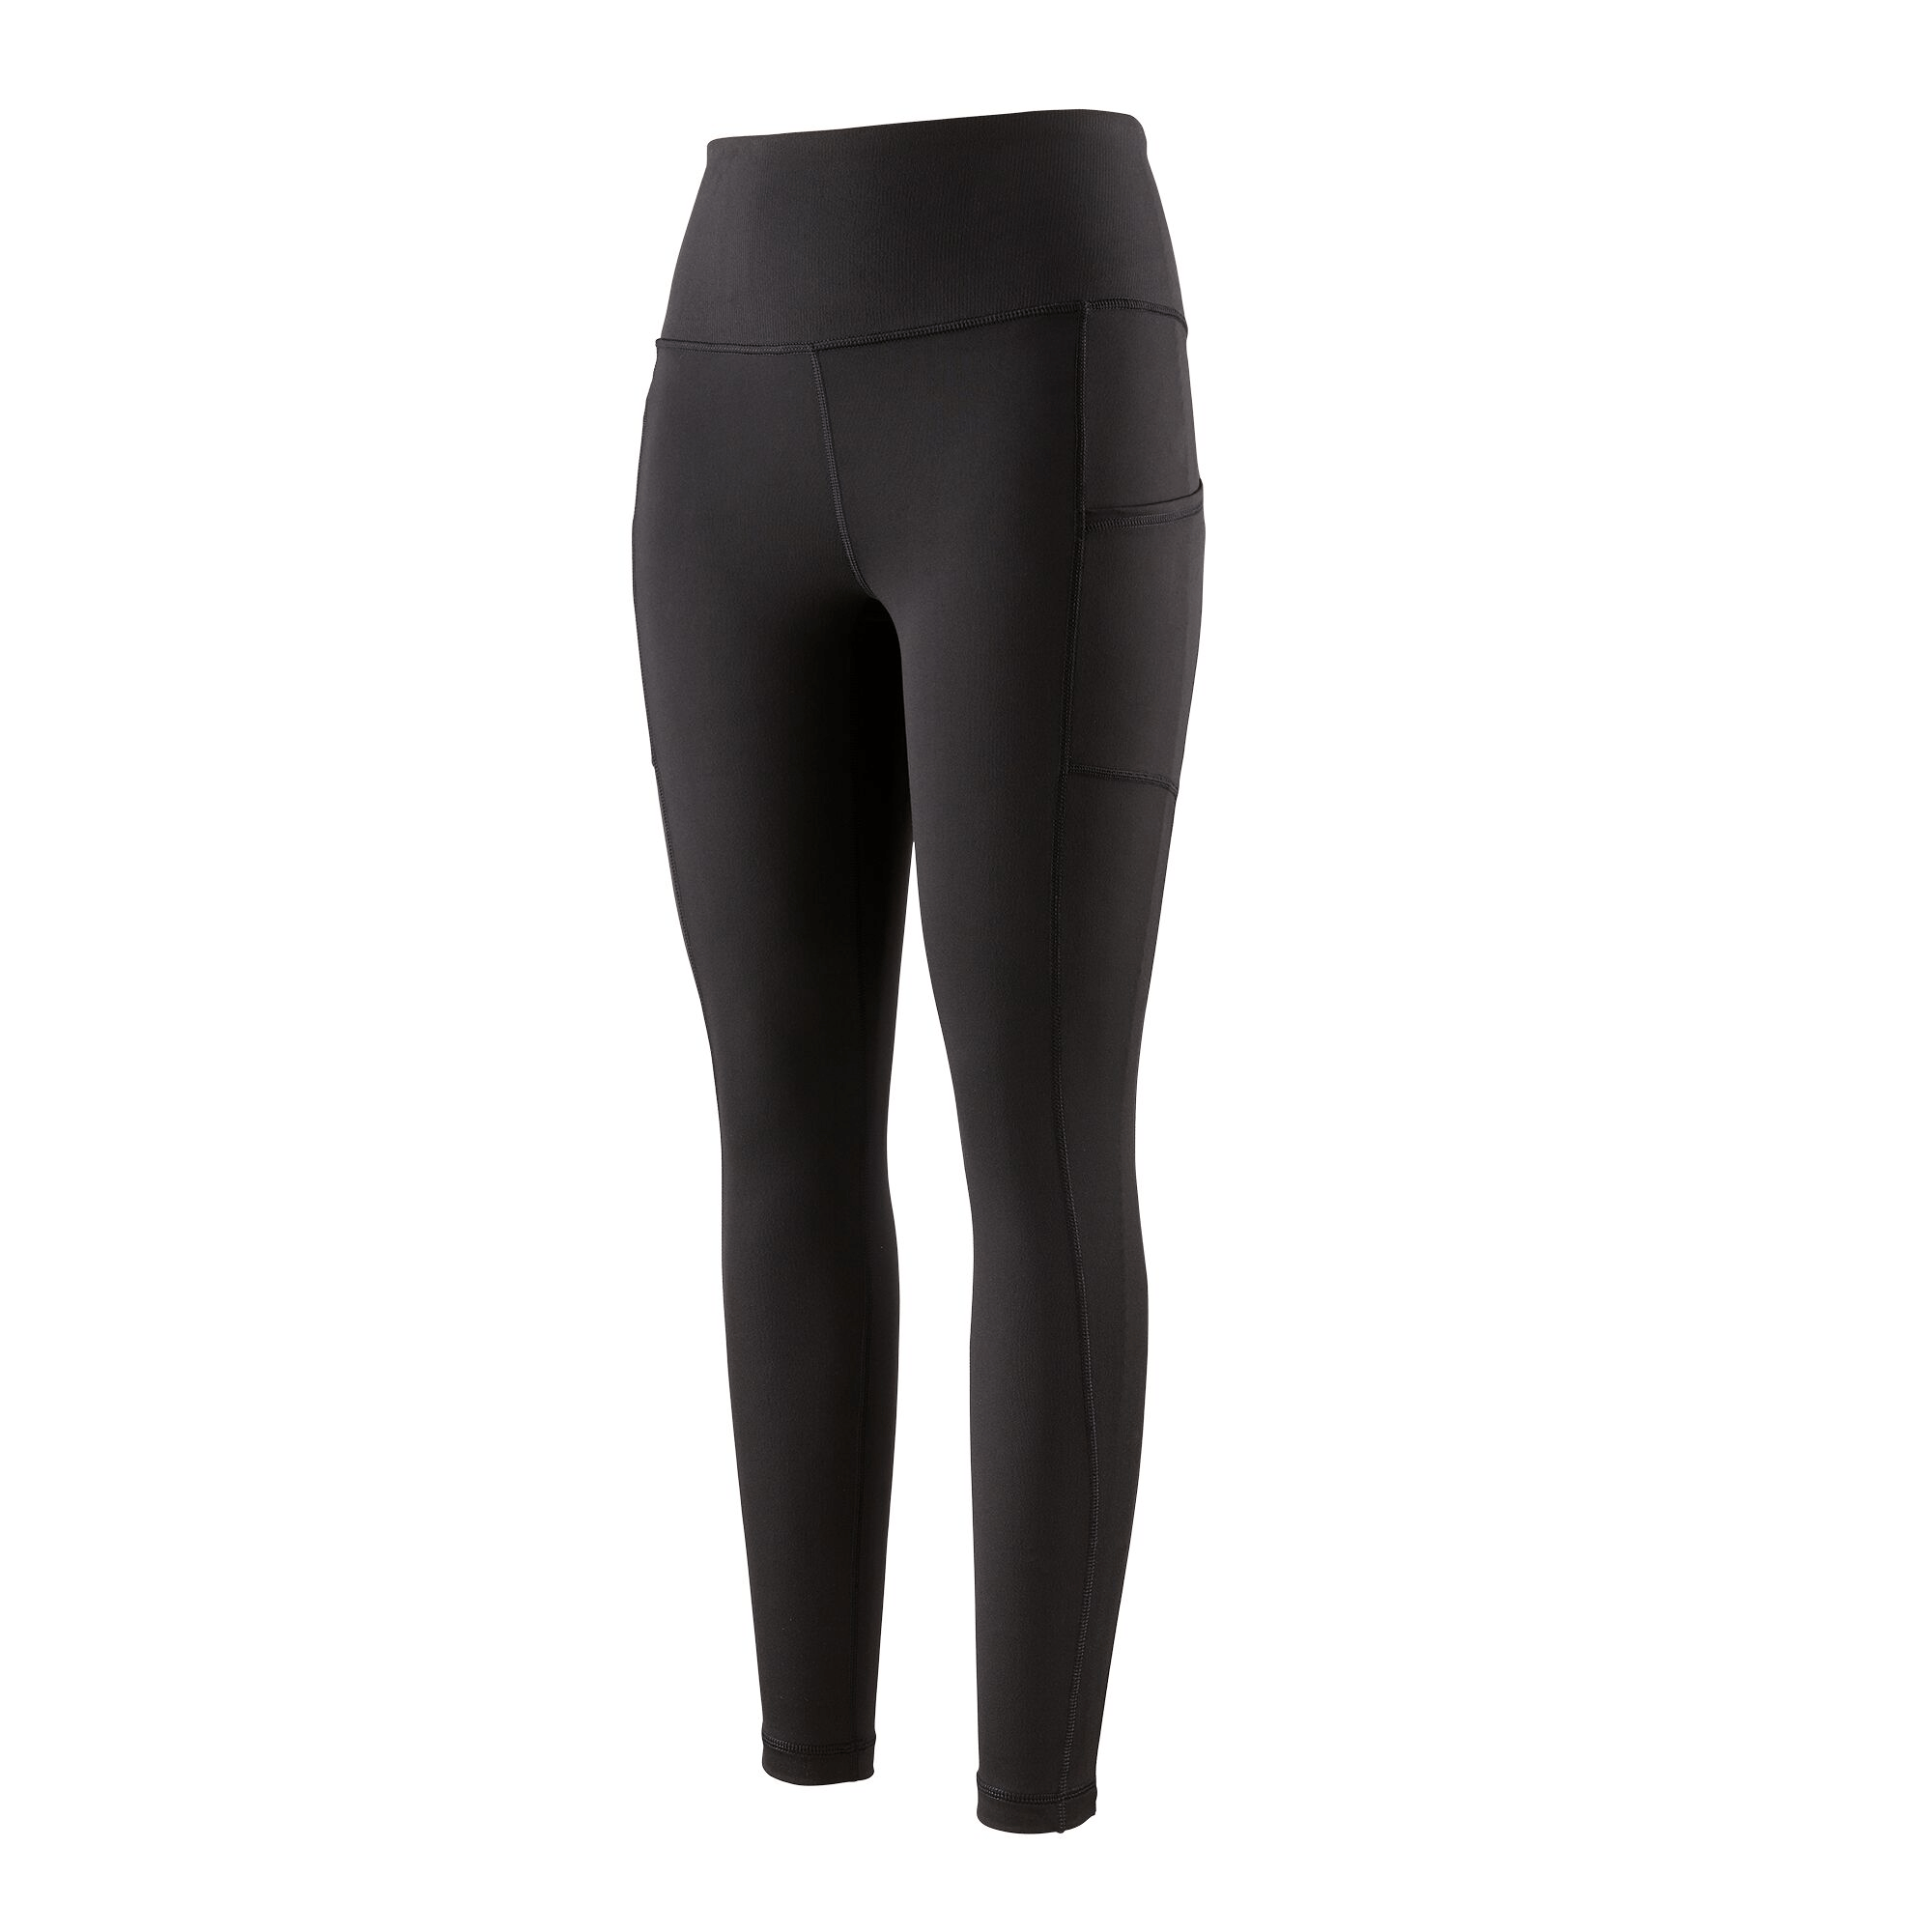 Patagonia Women's R1 Daily Bottoms